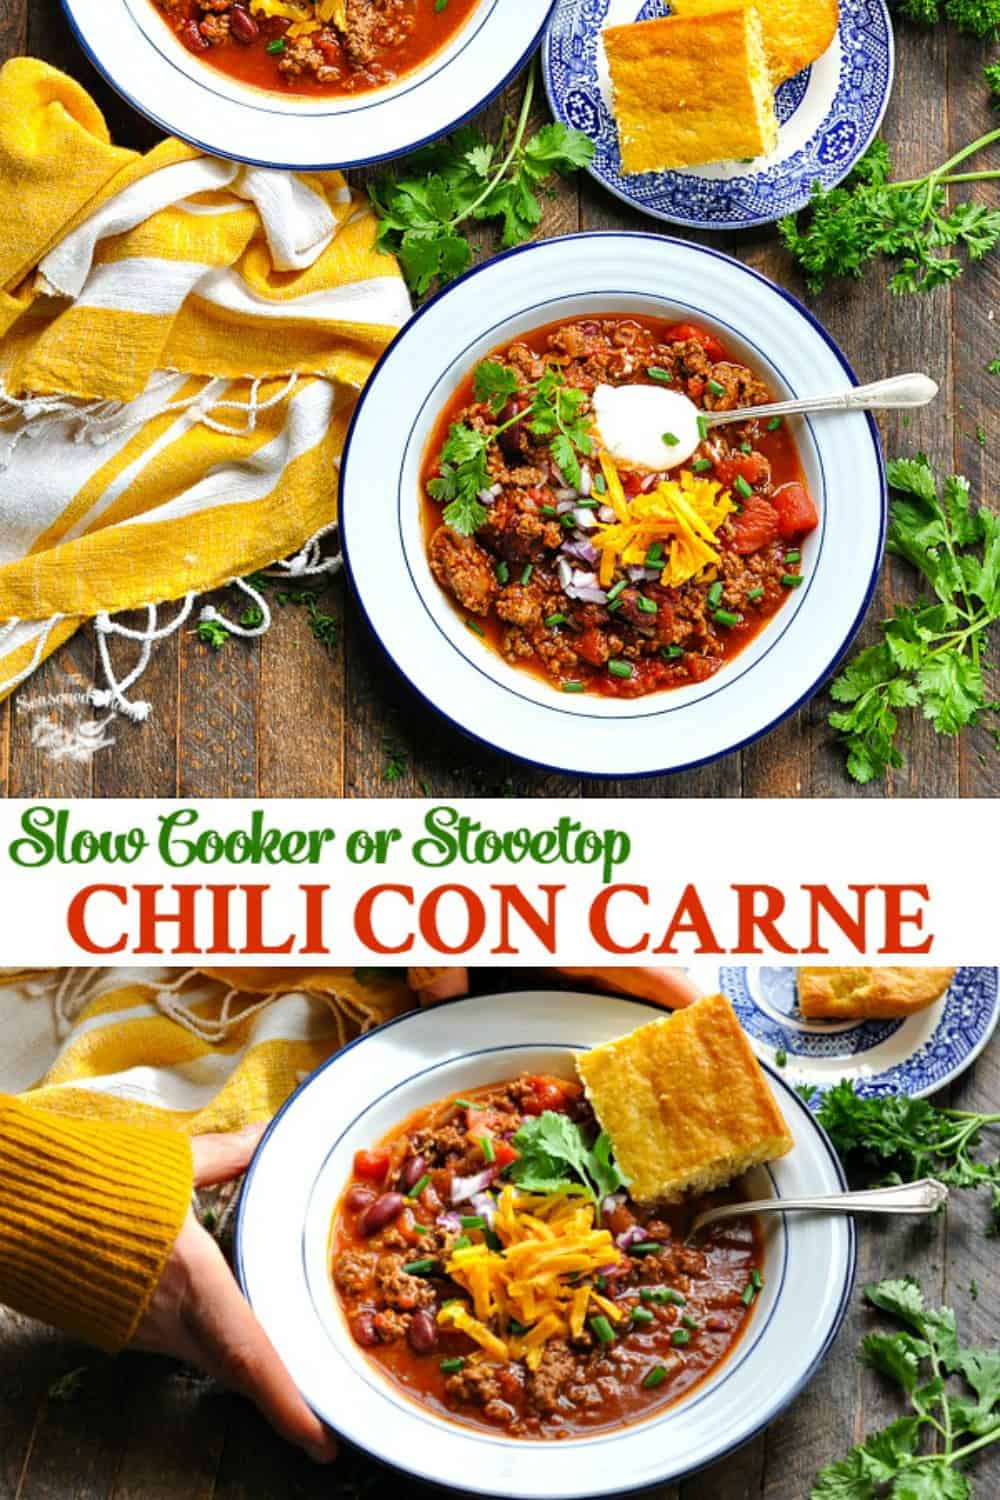 Long collage image of Chili Con Carne